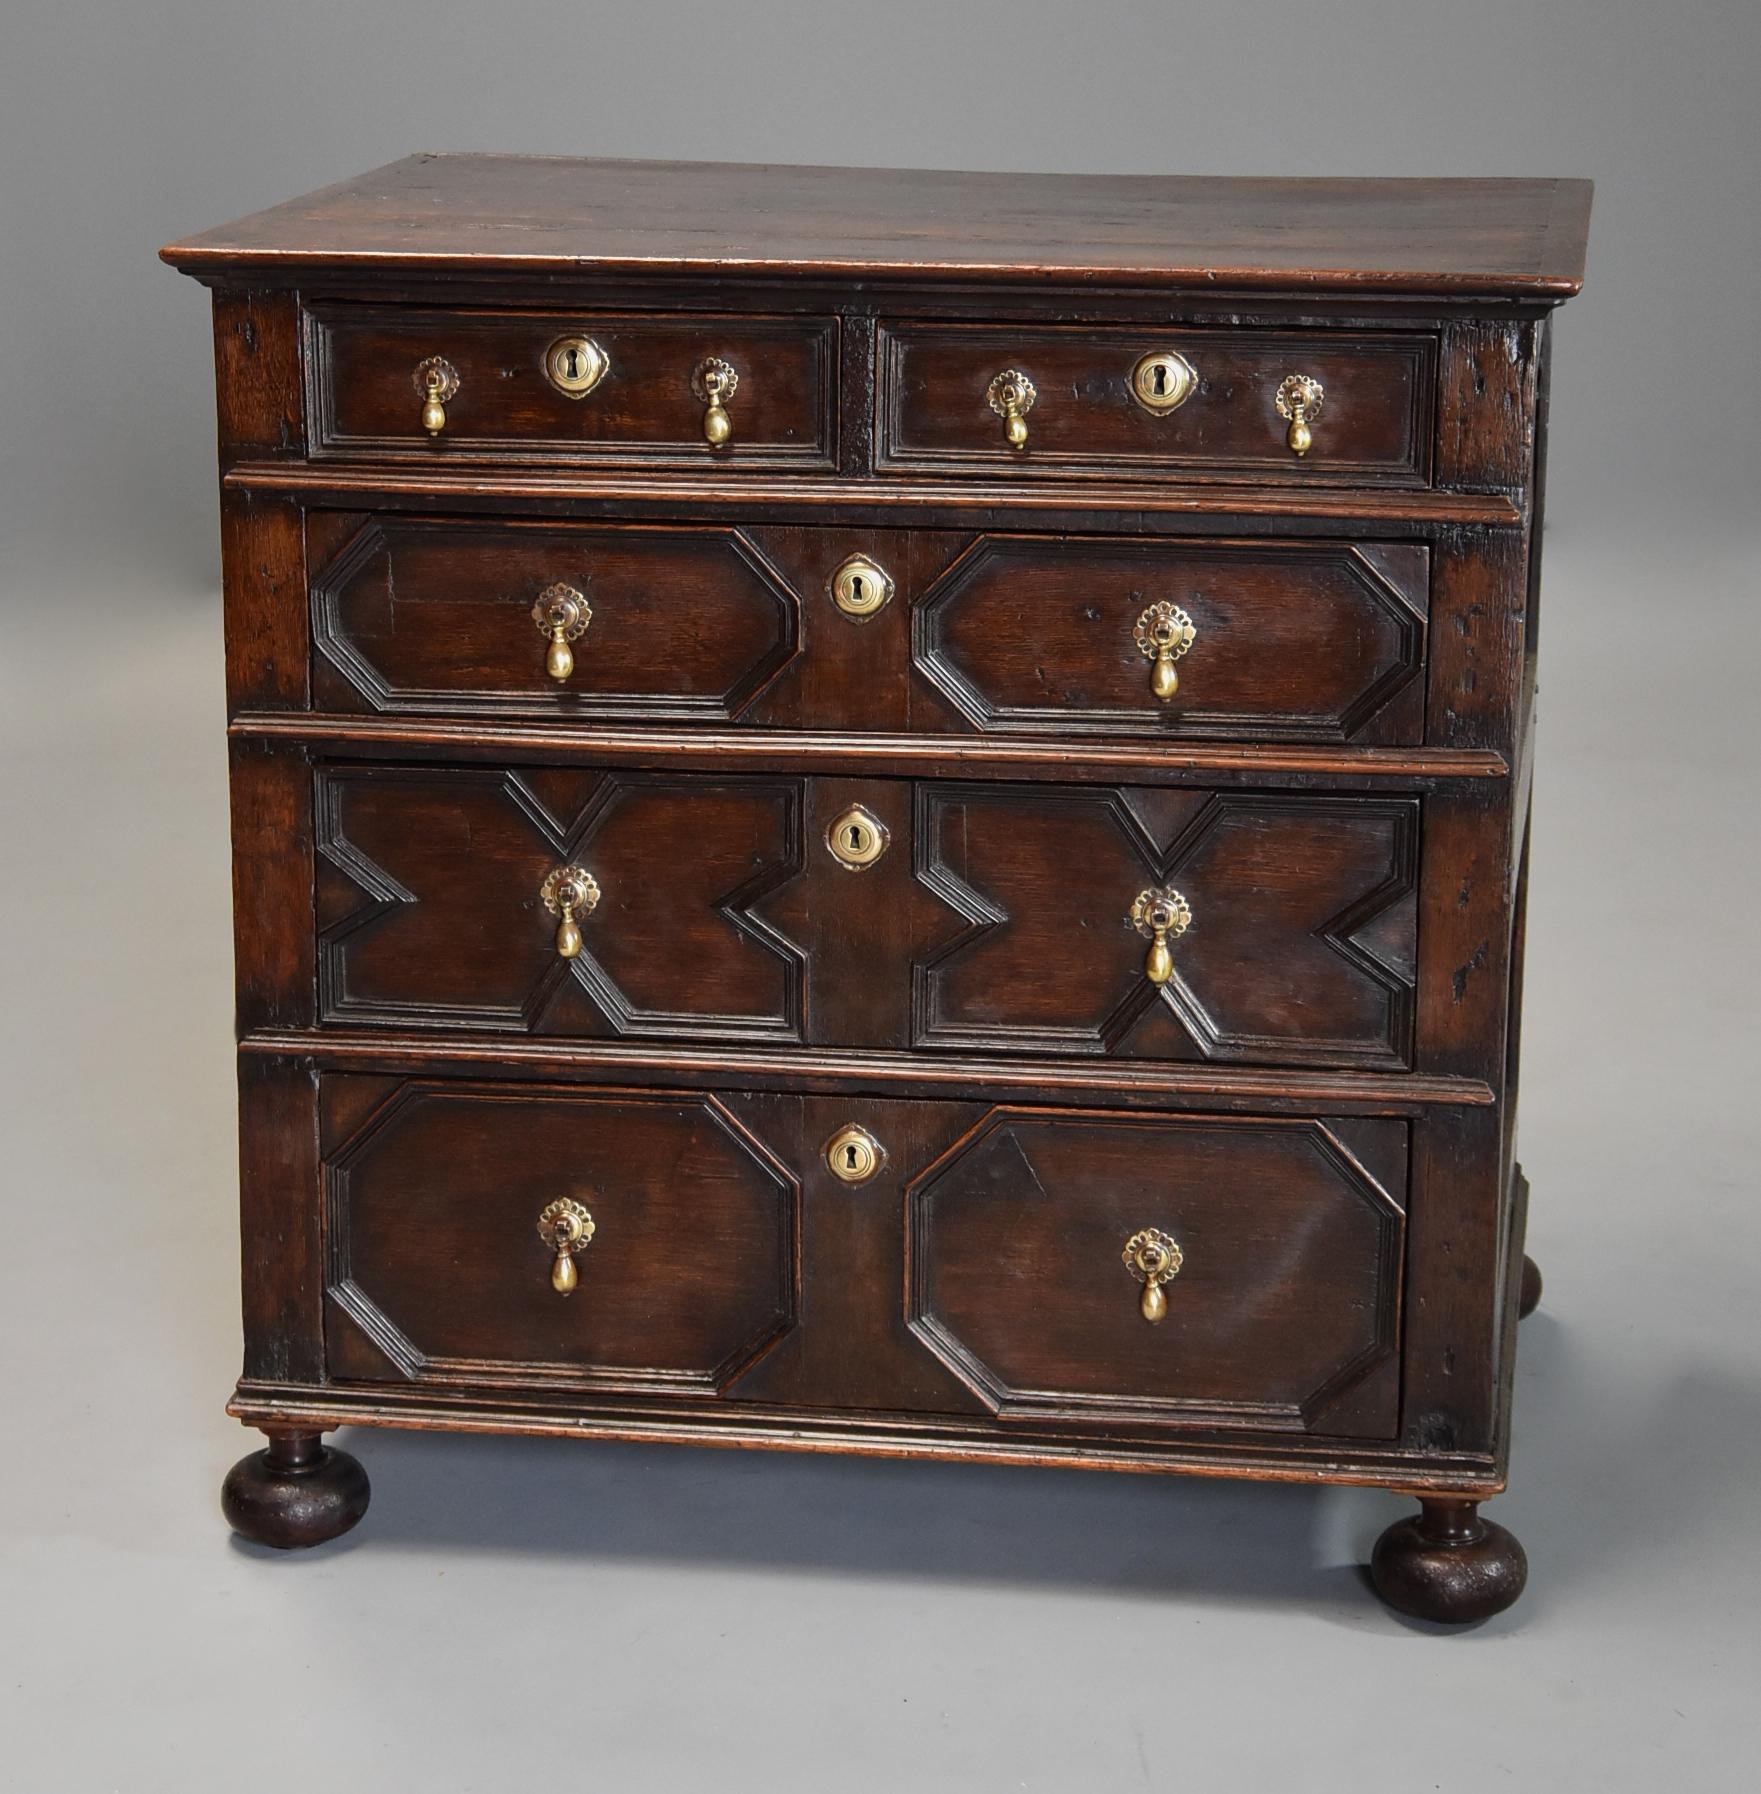 A late 17th-early 18th century oak moulded front (or joined) chest of drawers. 

This chest of drawers consists of a four plank top with moulded edge leading down to four graduated drawers with applied geometric moulded designs to the front, this